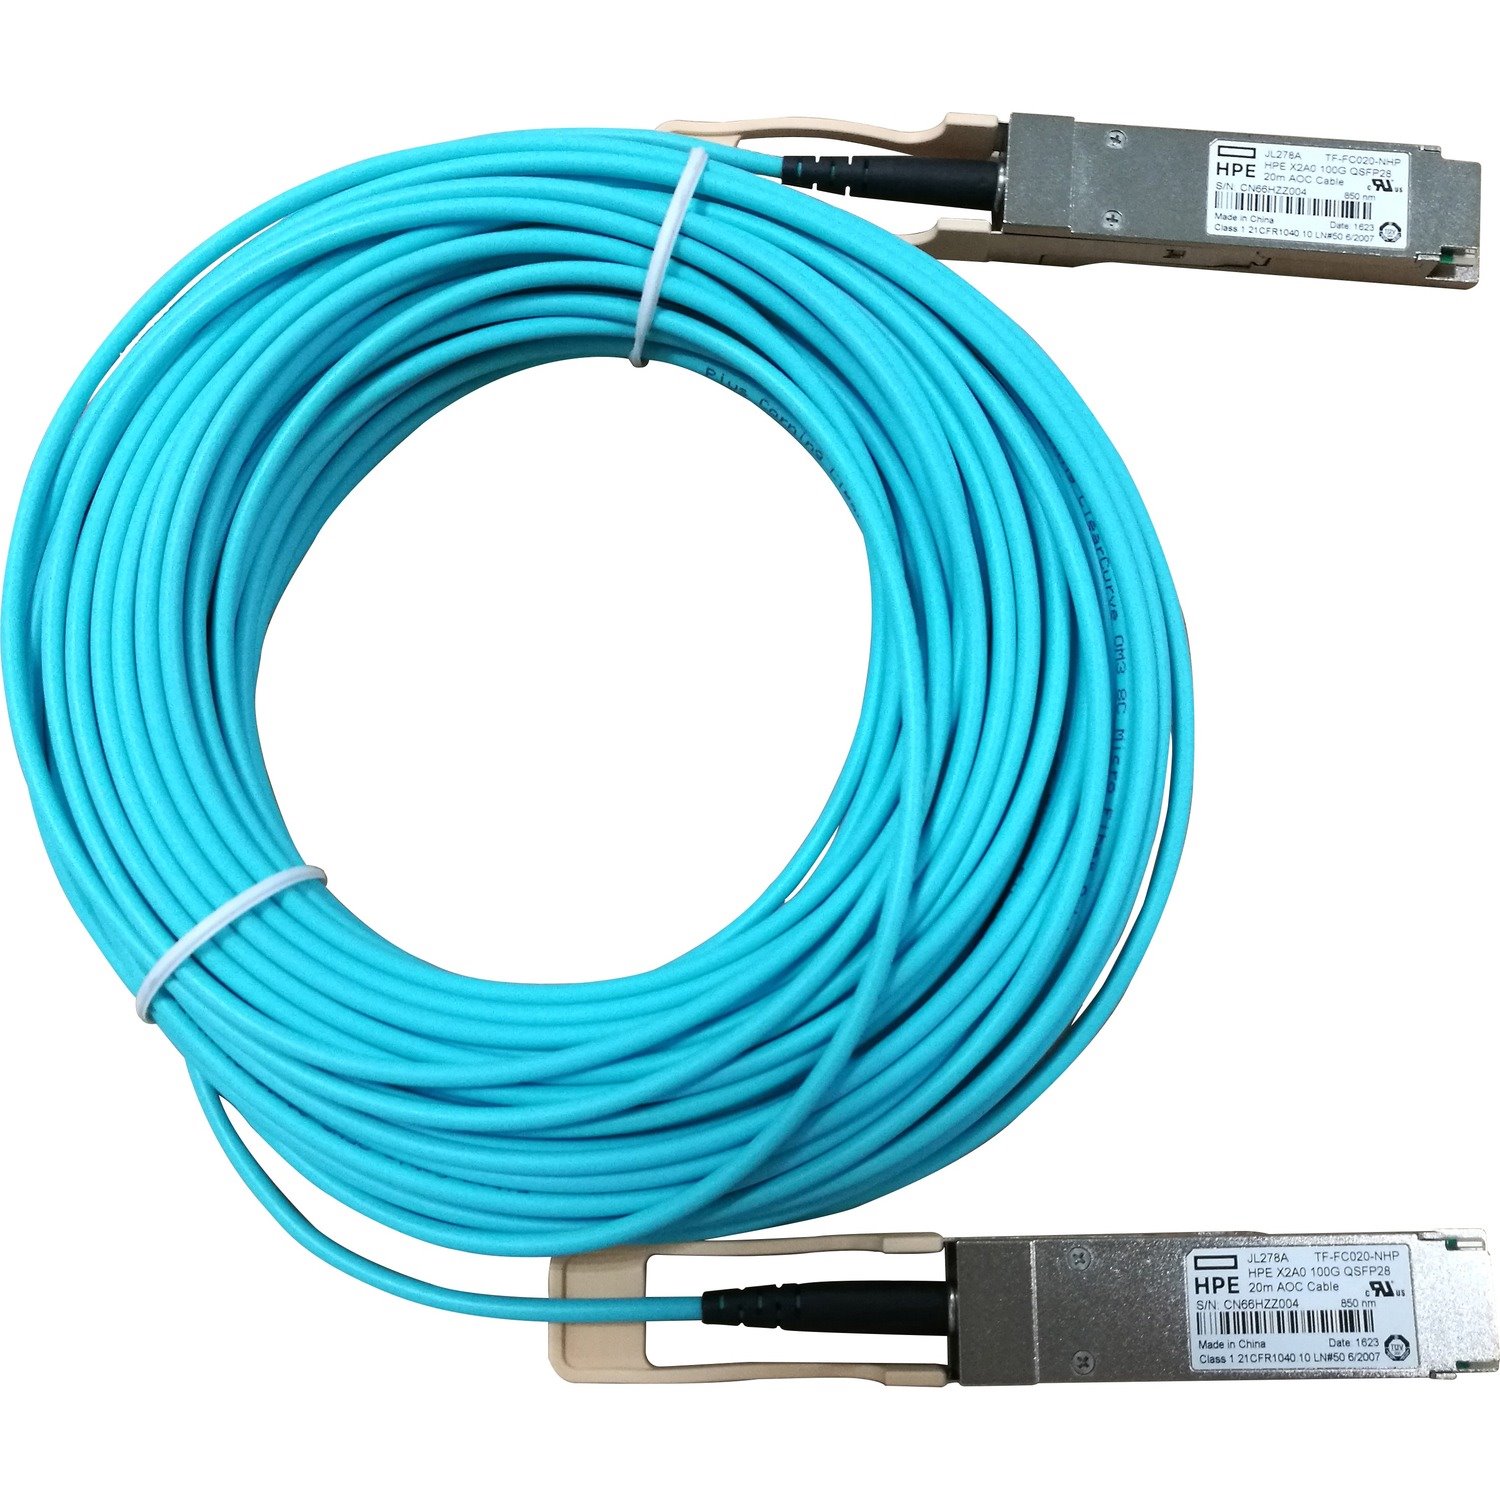 HPE X2A0 100G QSFP28 to QSFP28 20m Active Optical Cable